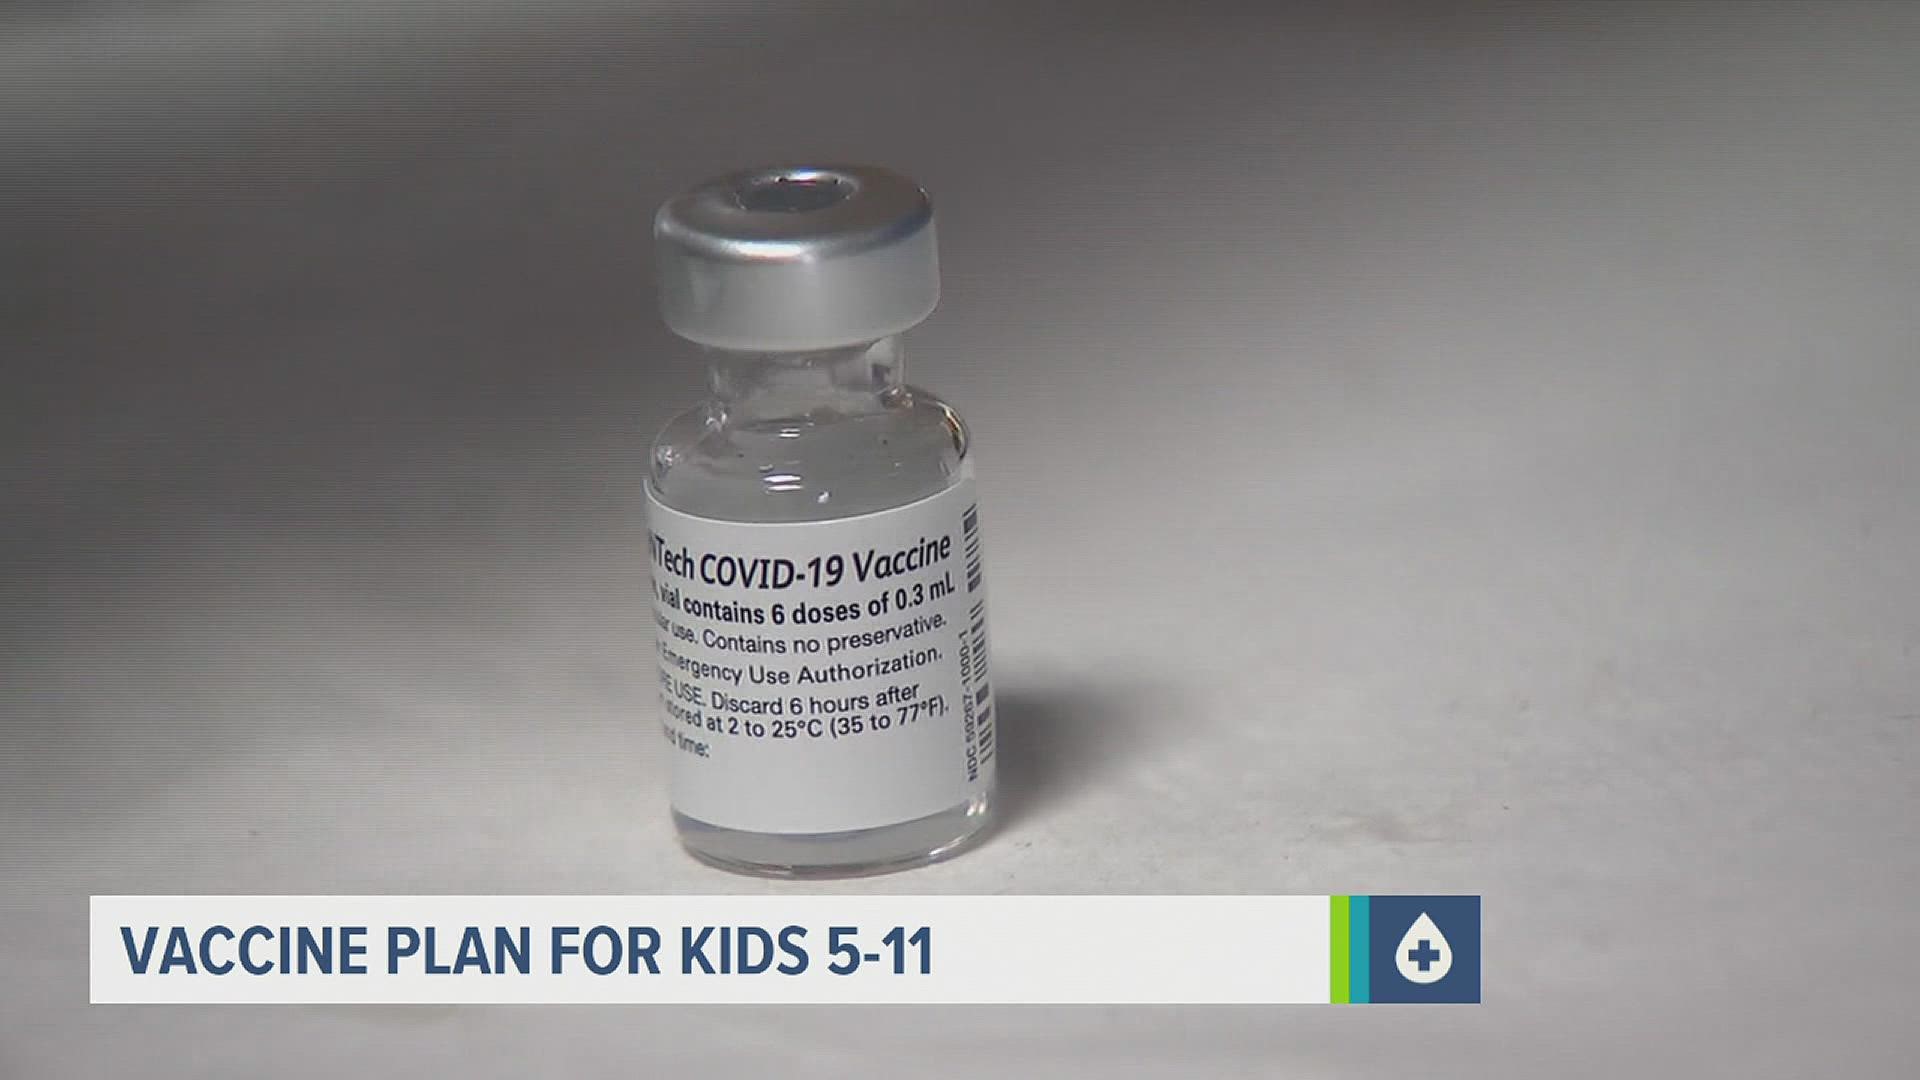 Millions of kids ages 5 to 11 are about to get access to the COVID-19 vaccine.